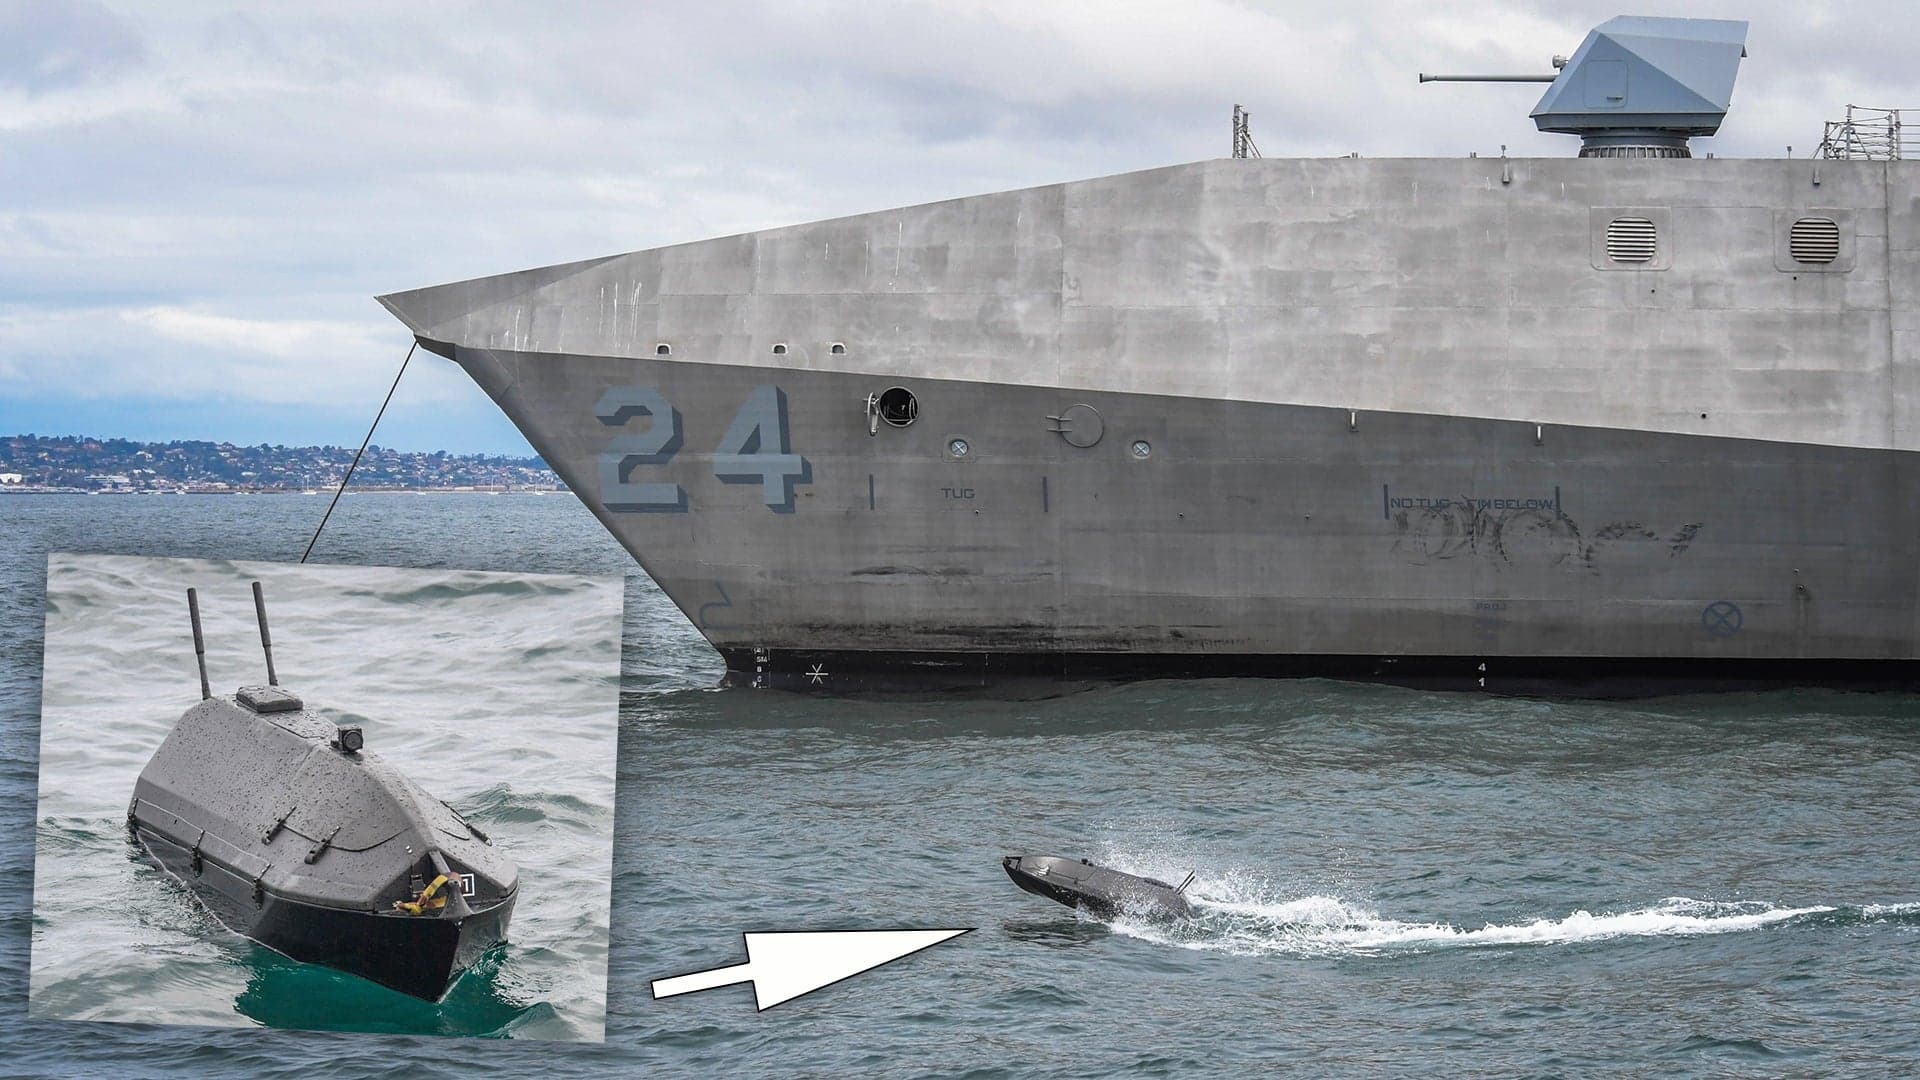 This Tiny Drone Boat Is Being Tested During The Navy’s Big Manned-Unmanned Teaming Experiment